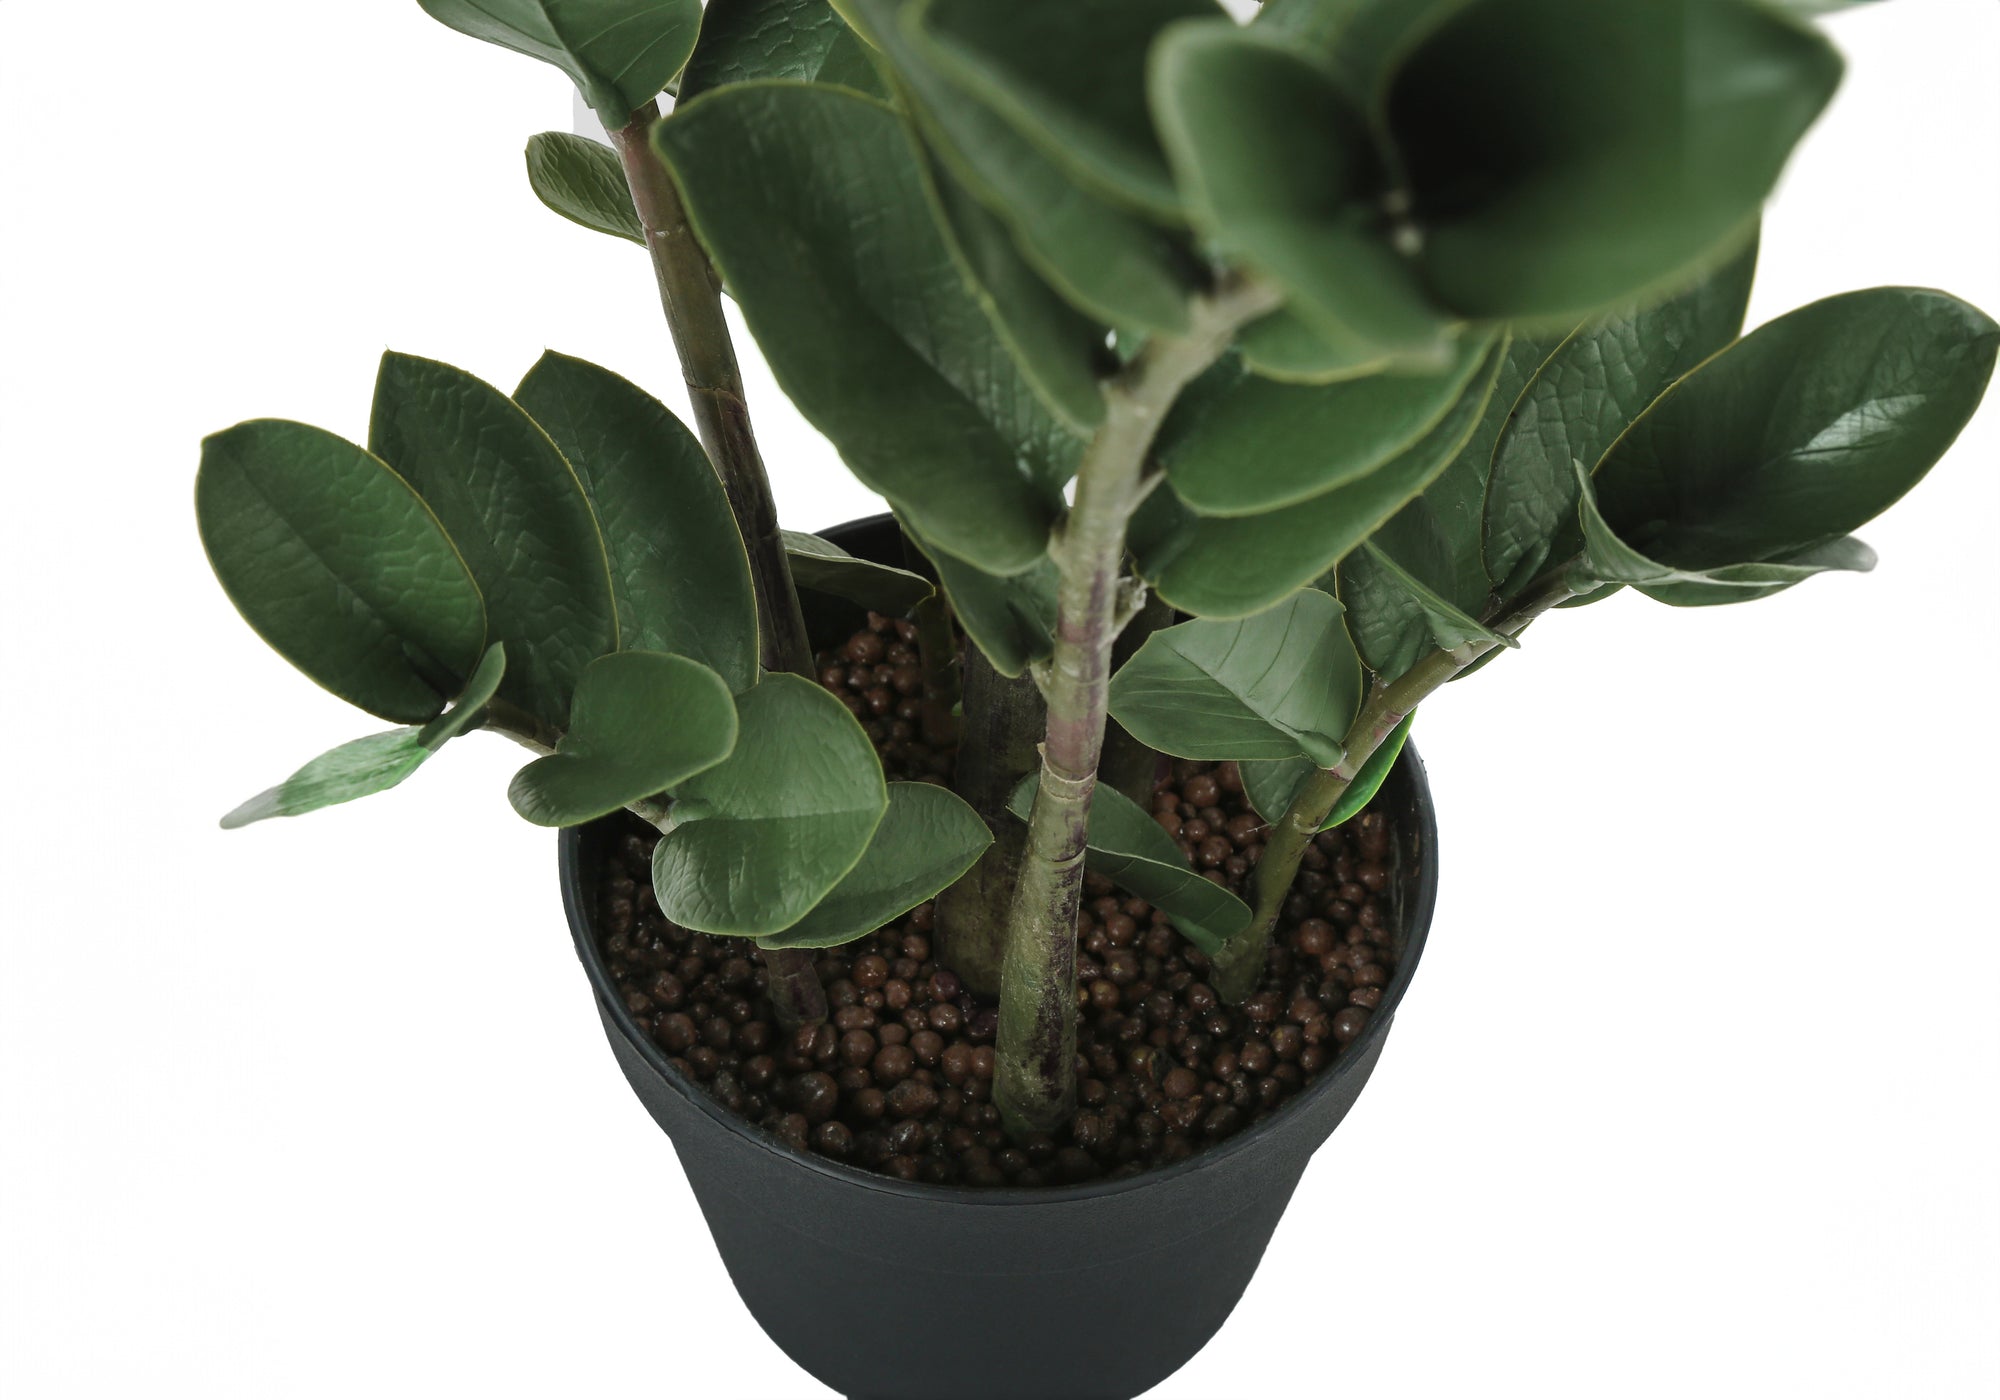 MN-279506    Artificial Plant, 29" Tall, Zz Tree, Indoor, Faux, Fake, Floor, Greenery, Potted, Real Touch, Decorative, Green Leaves, Black Pot